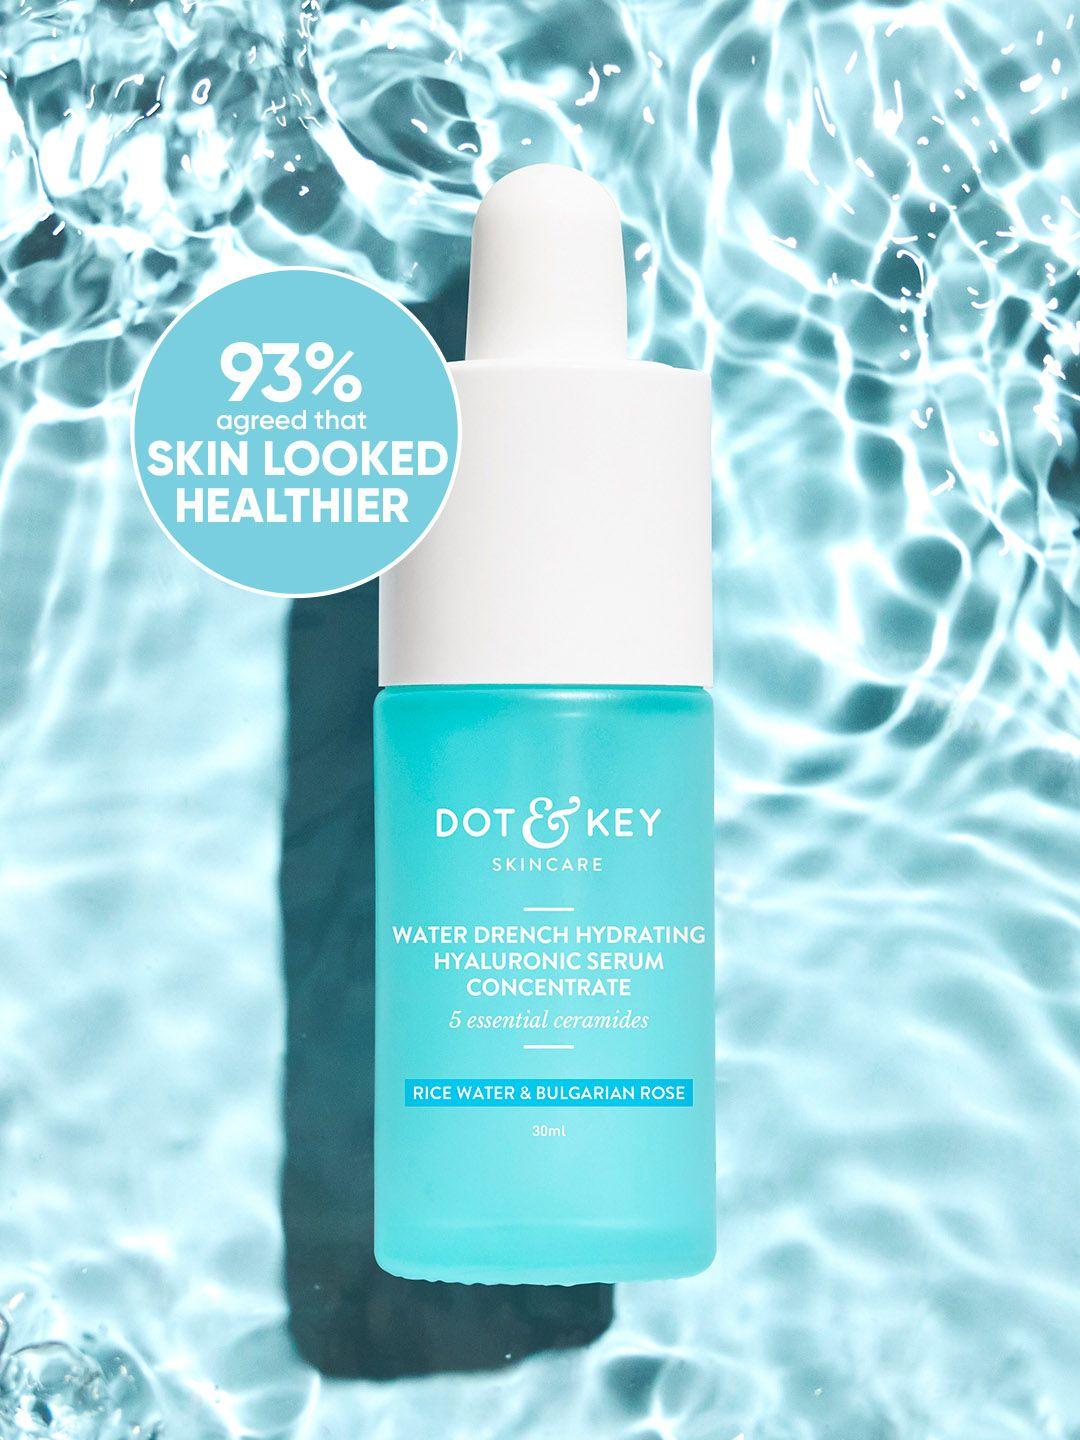 dot & key hydrating hyaluronic face serum with vitamin c & e for plump glowing skin- 30ml